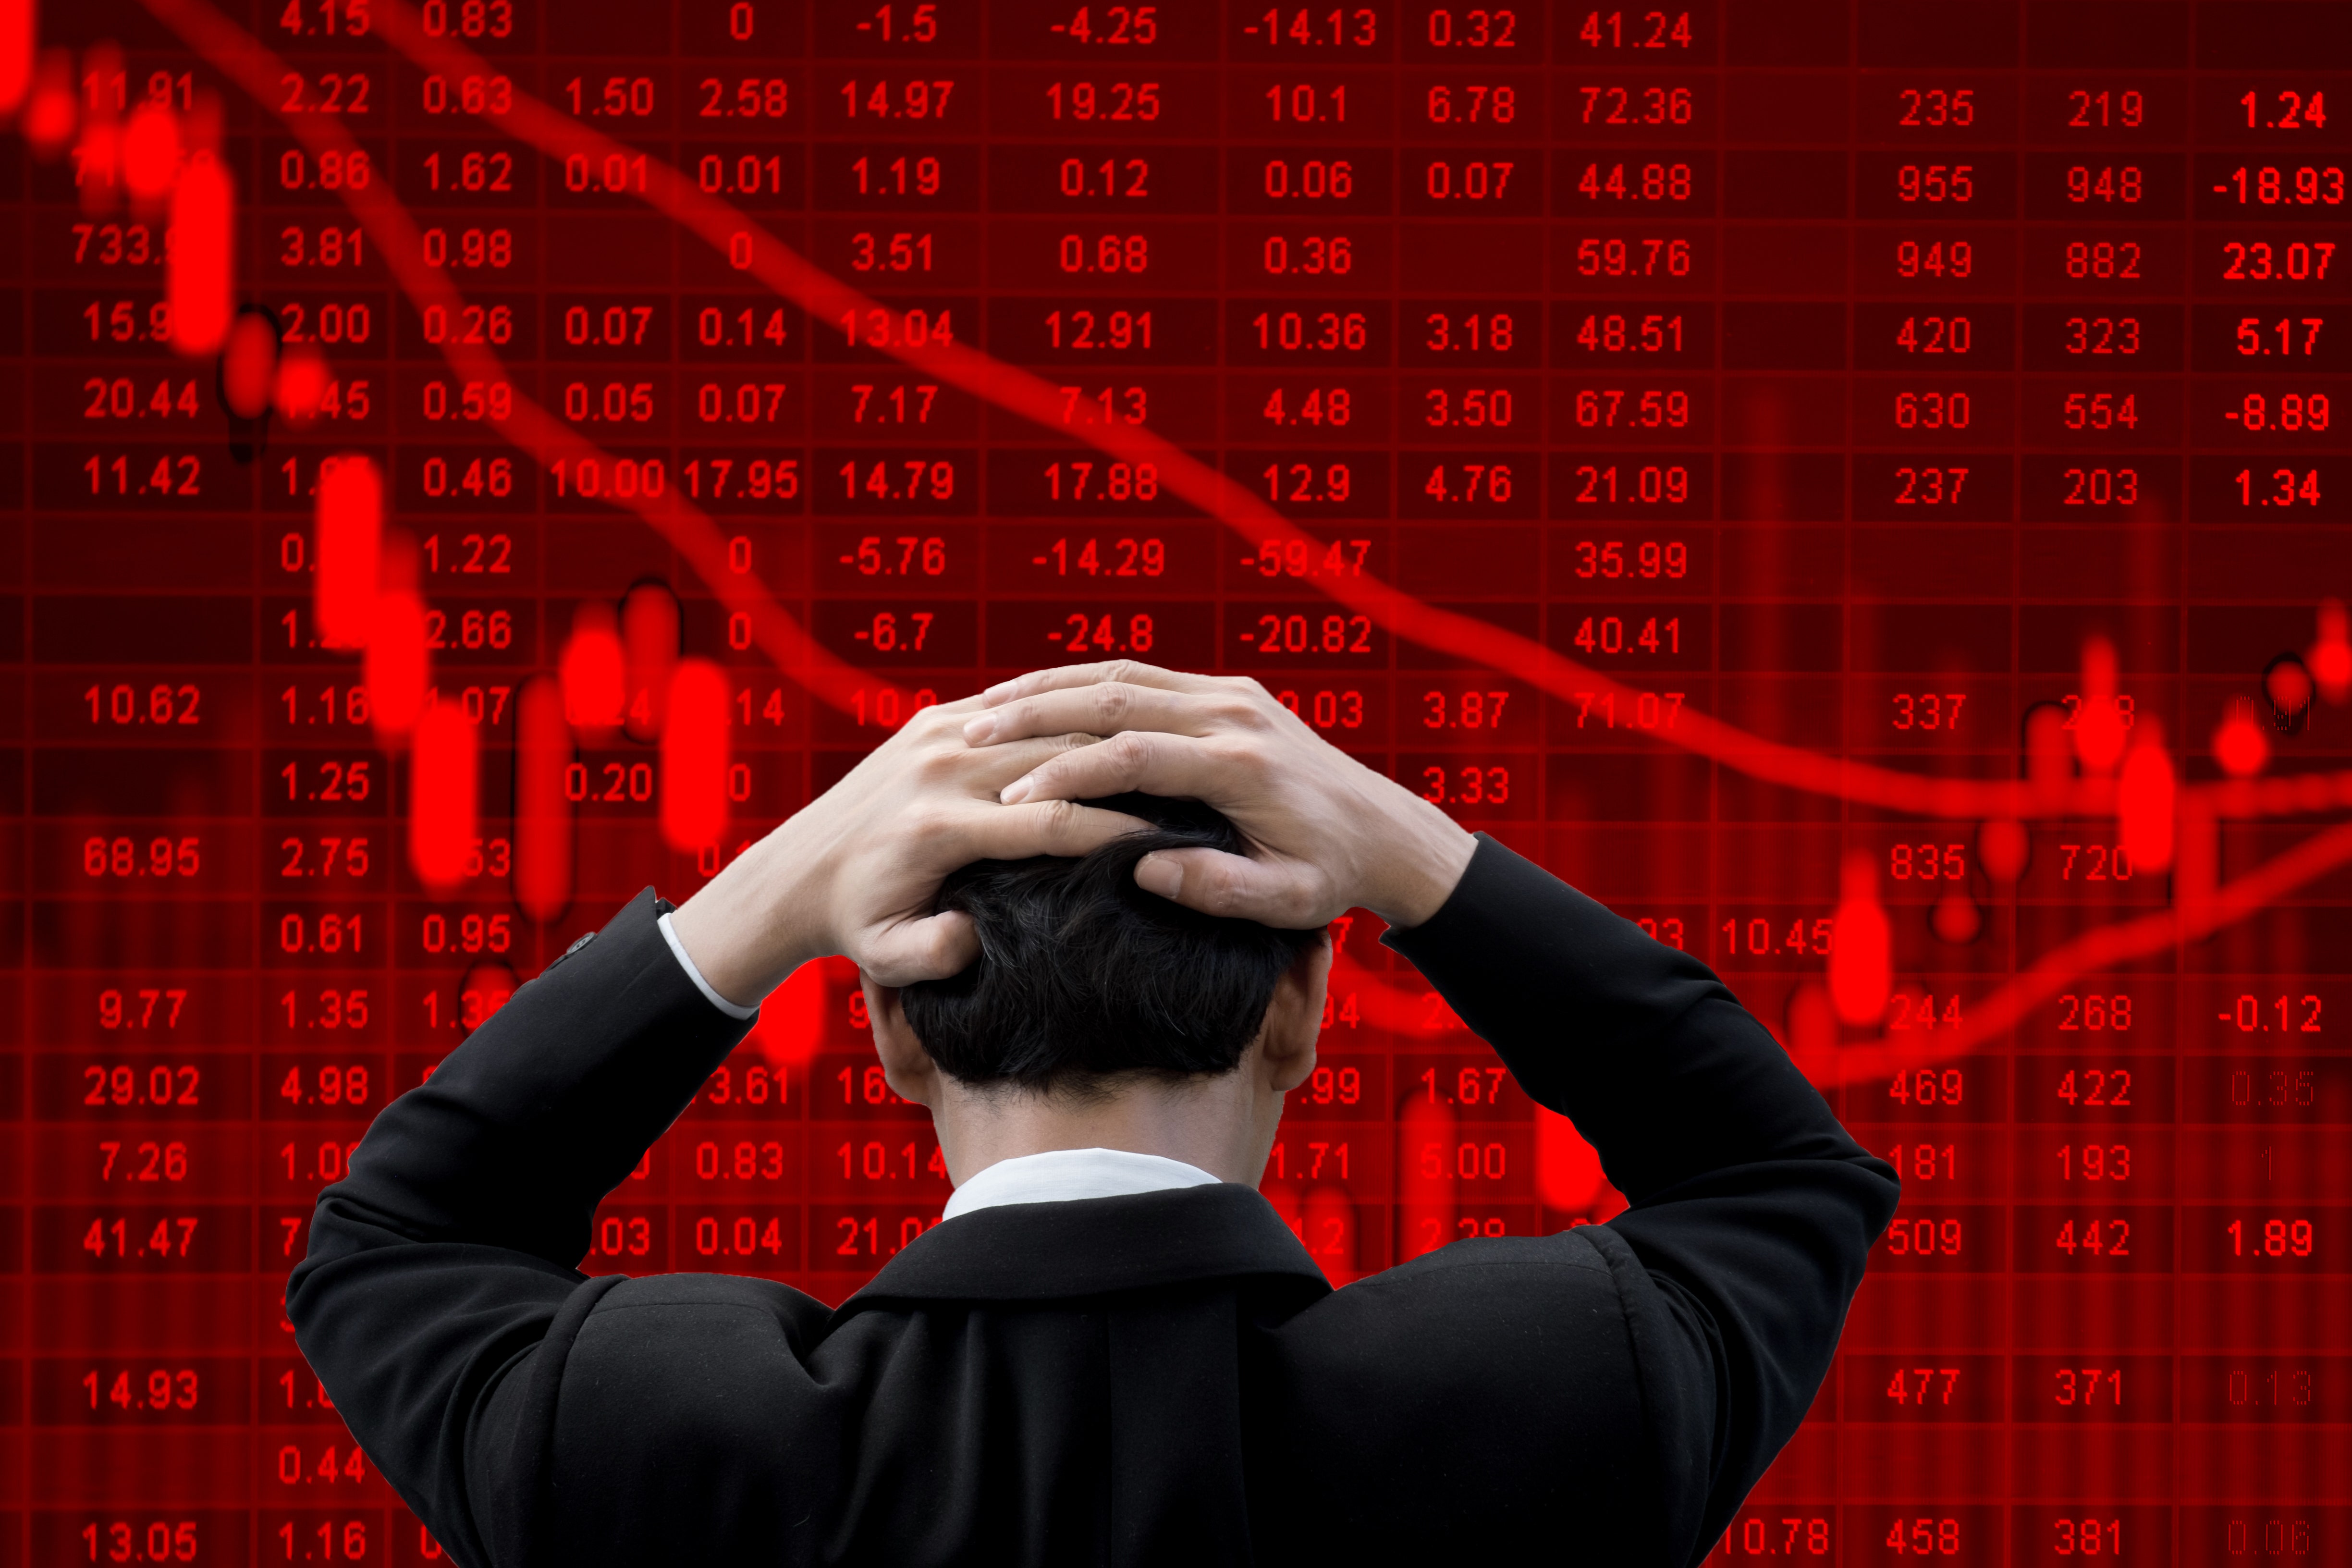 Brief Recession or Complete Economic Collapse? What These Wall Street Veterans Think